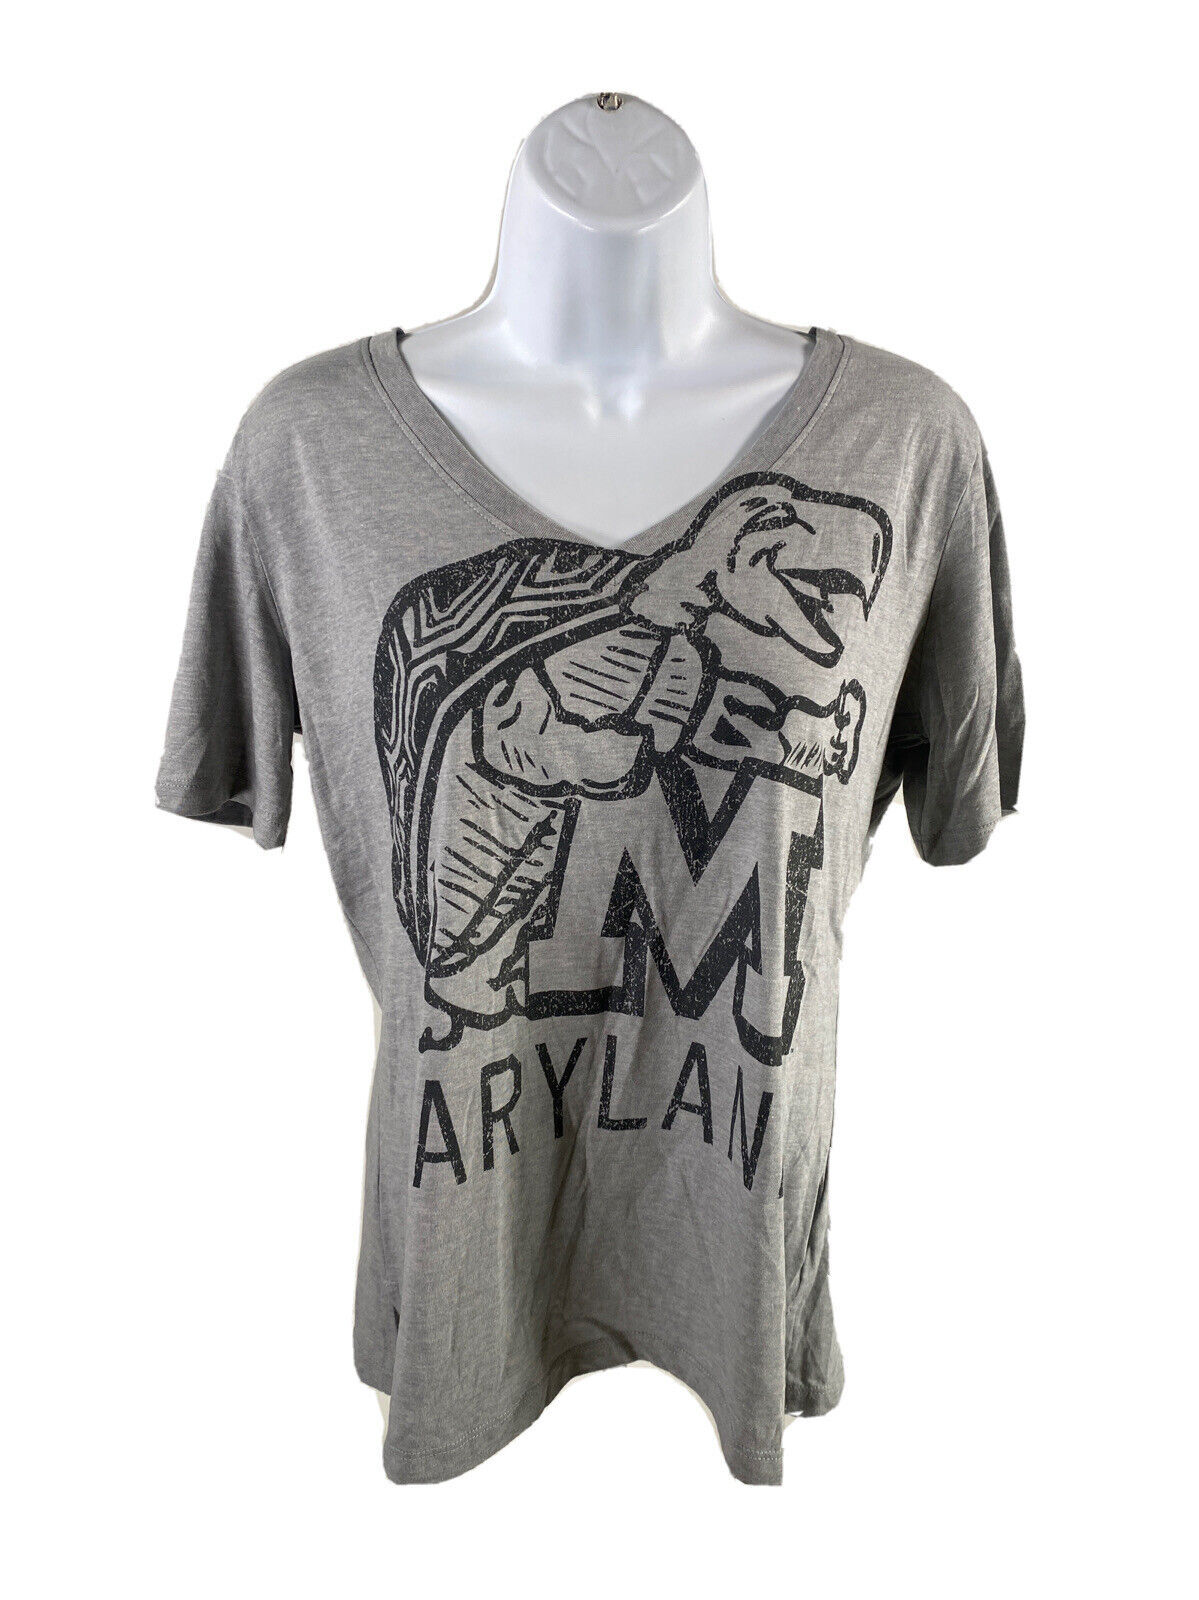 NEW Under Armour Women's Gray Maryland Terrapins V-Neck T-Shirt - M